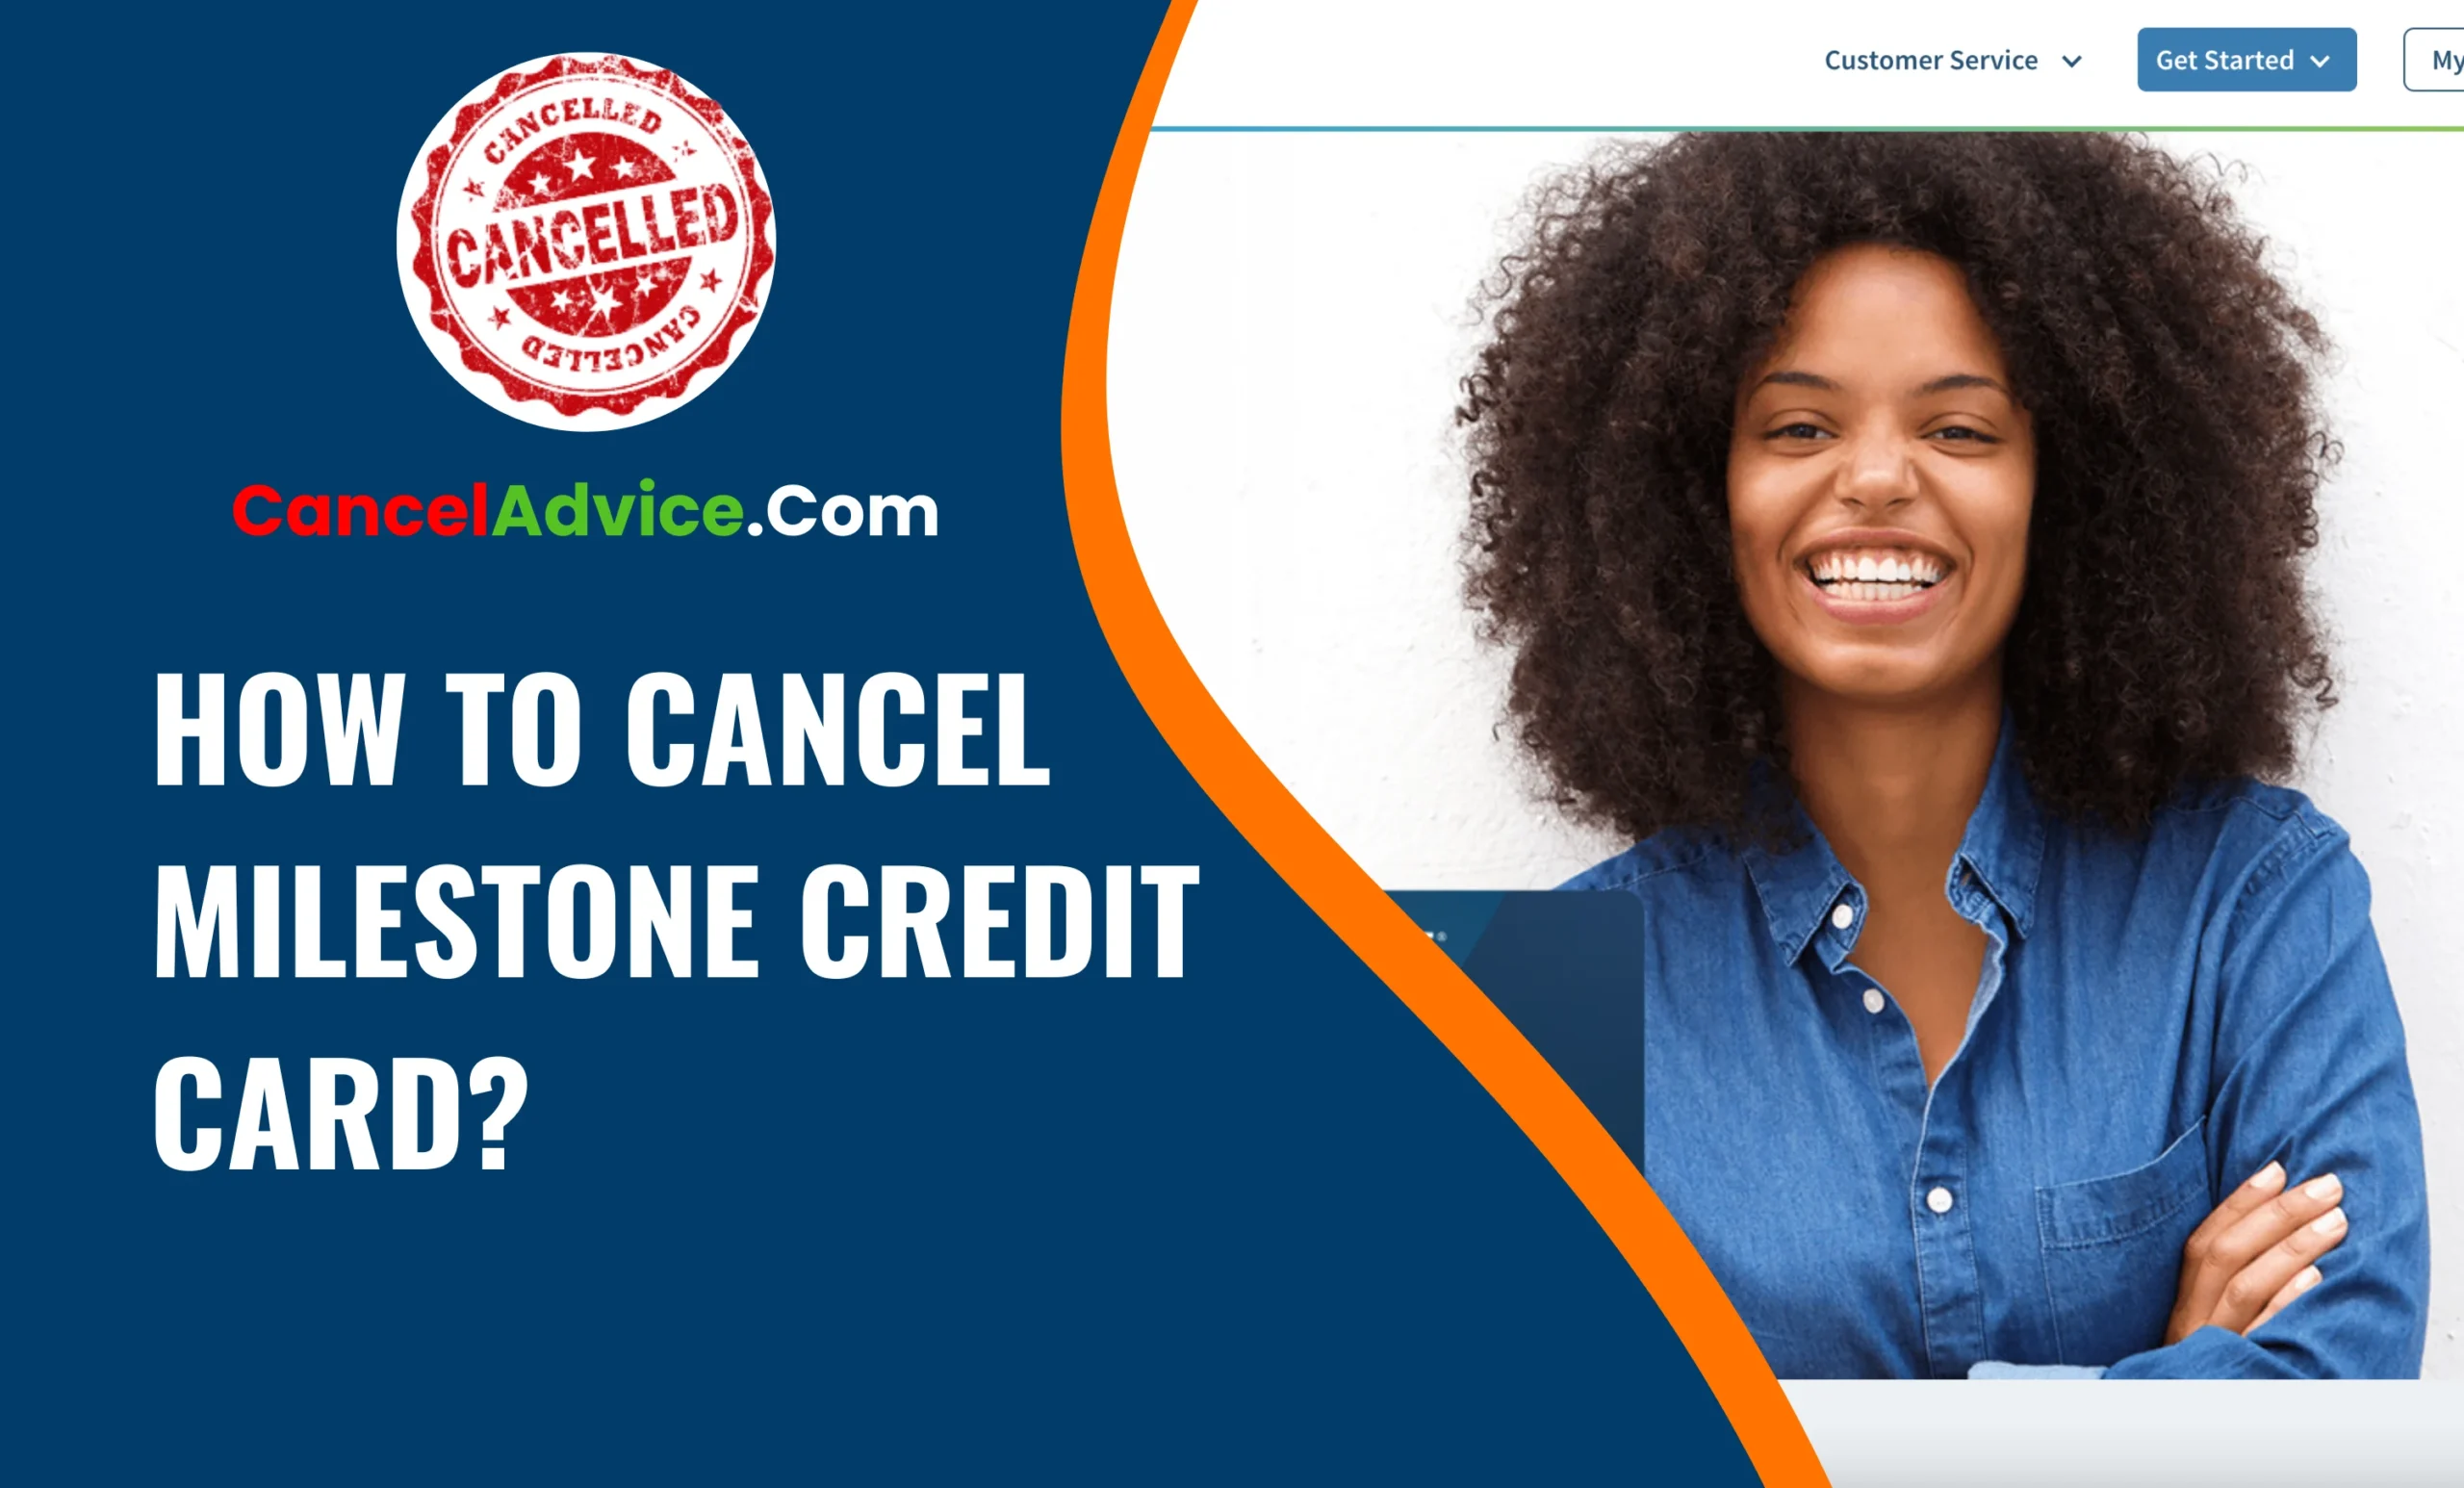 How to Cancel Milestone Credit Card